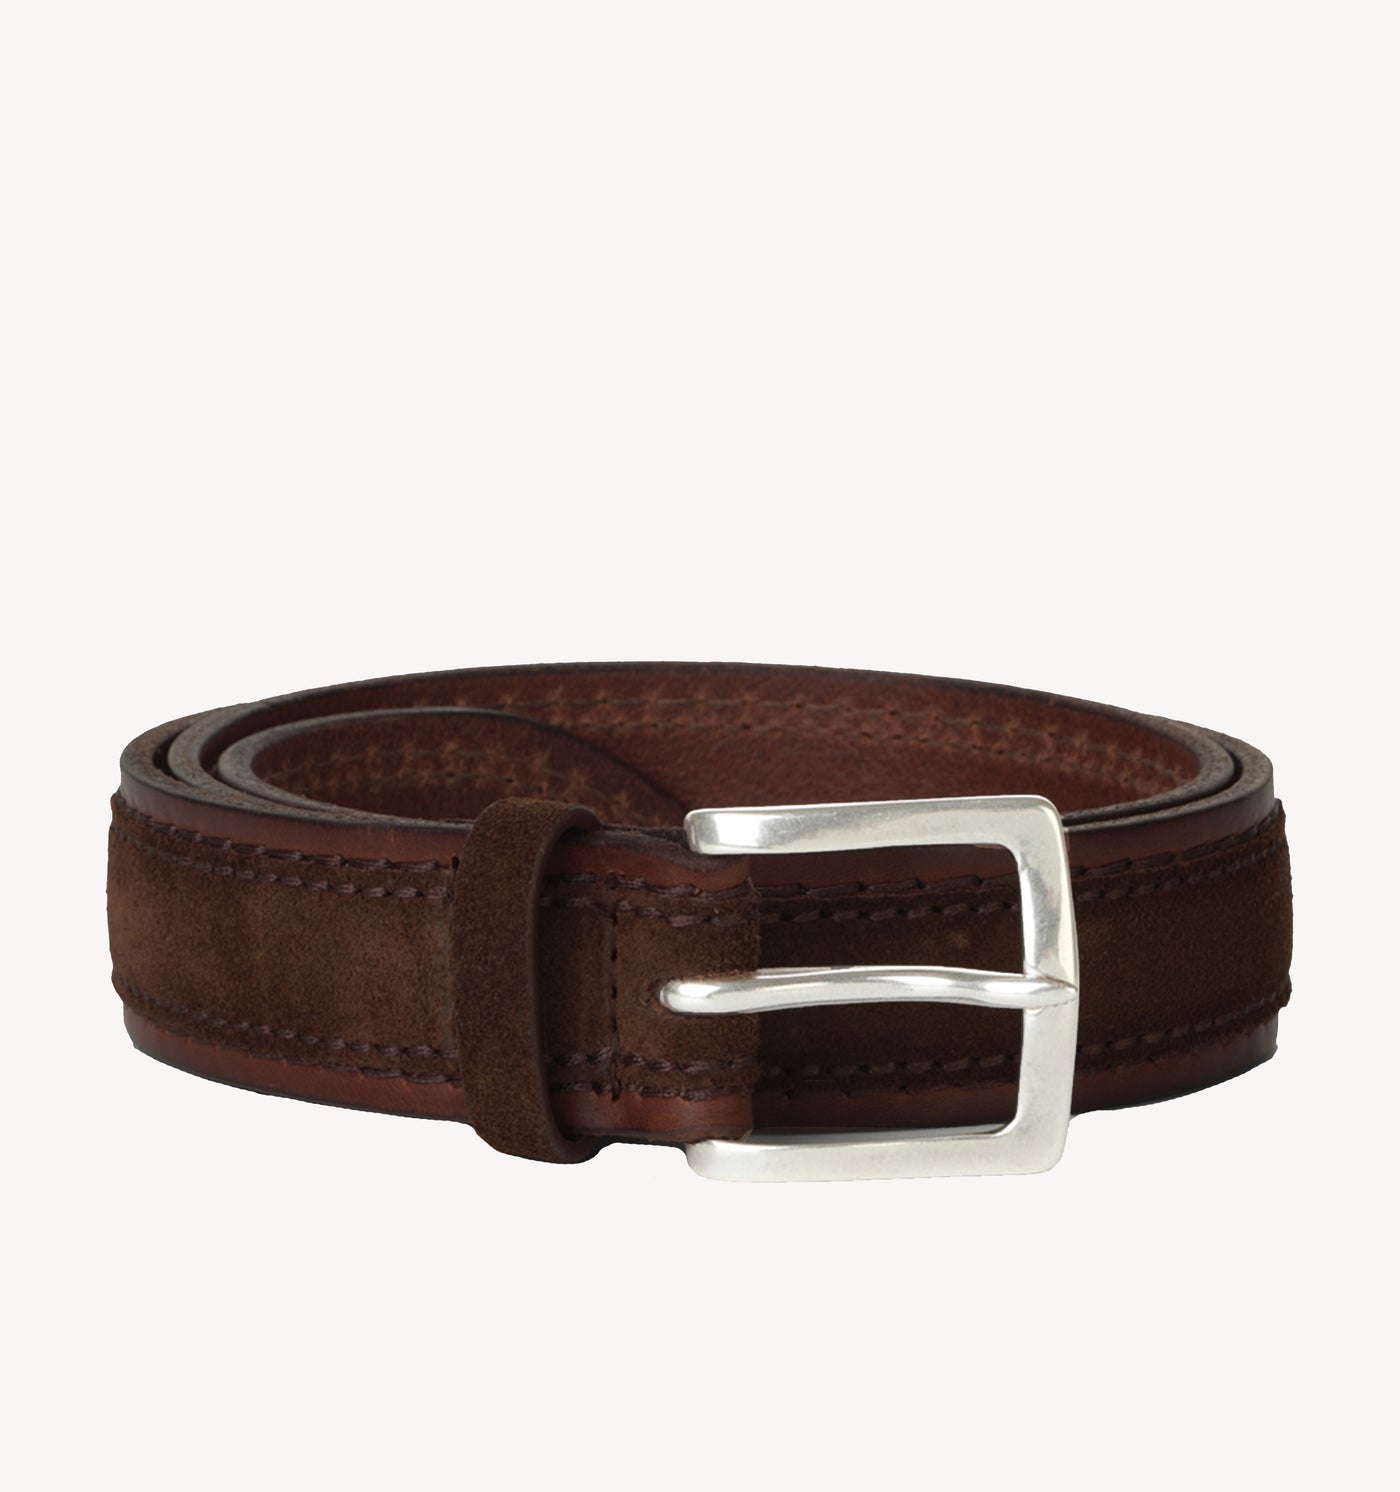 Orciani Suede Layered Belt in Chocolate